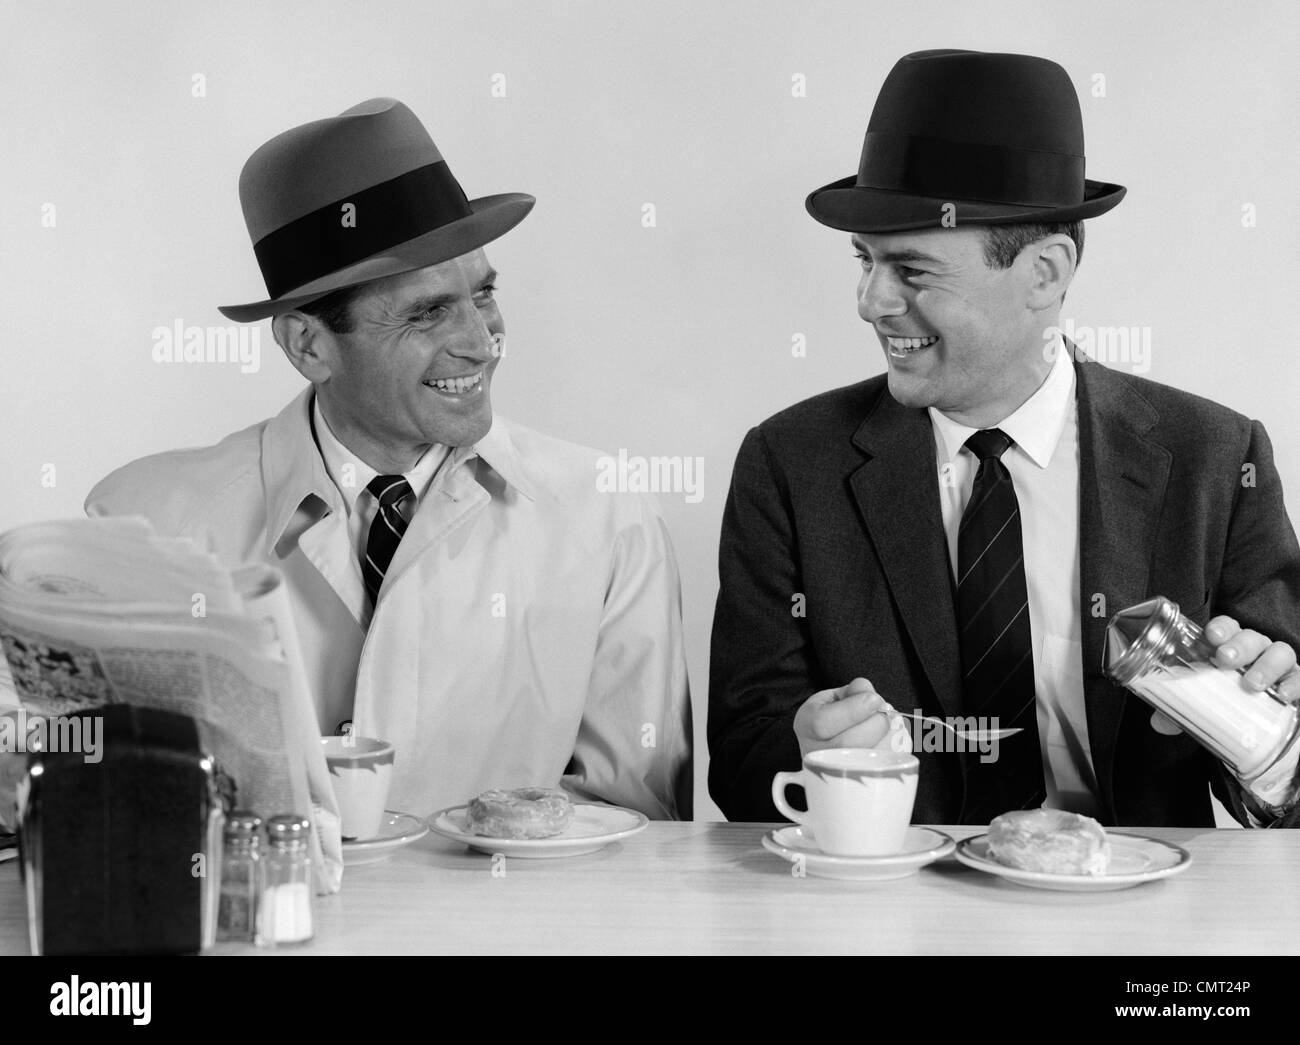 1960s TWO BUSINESSMEN WEARING HATS DRINKING COFFEE SMILING TALKING SITTING TOGETHER AT A DINER LUNCH COUNTER Stock Photo